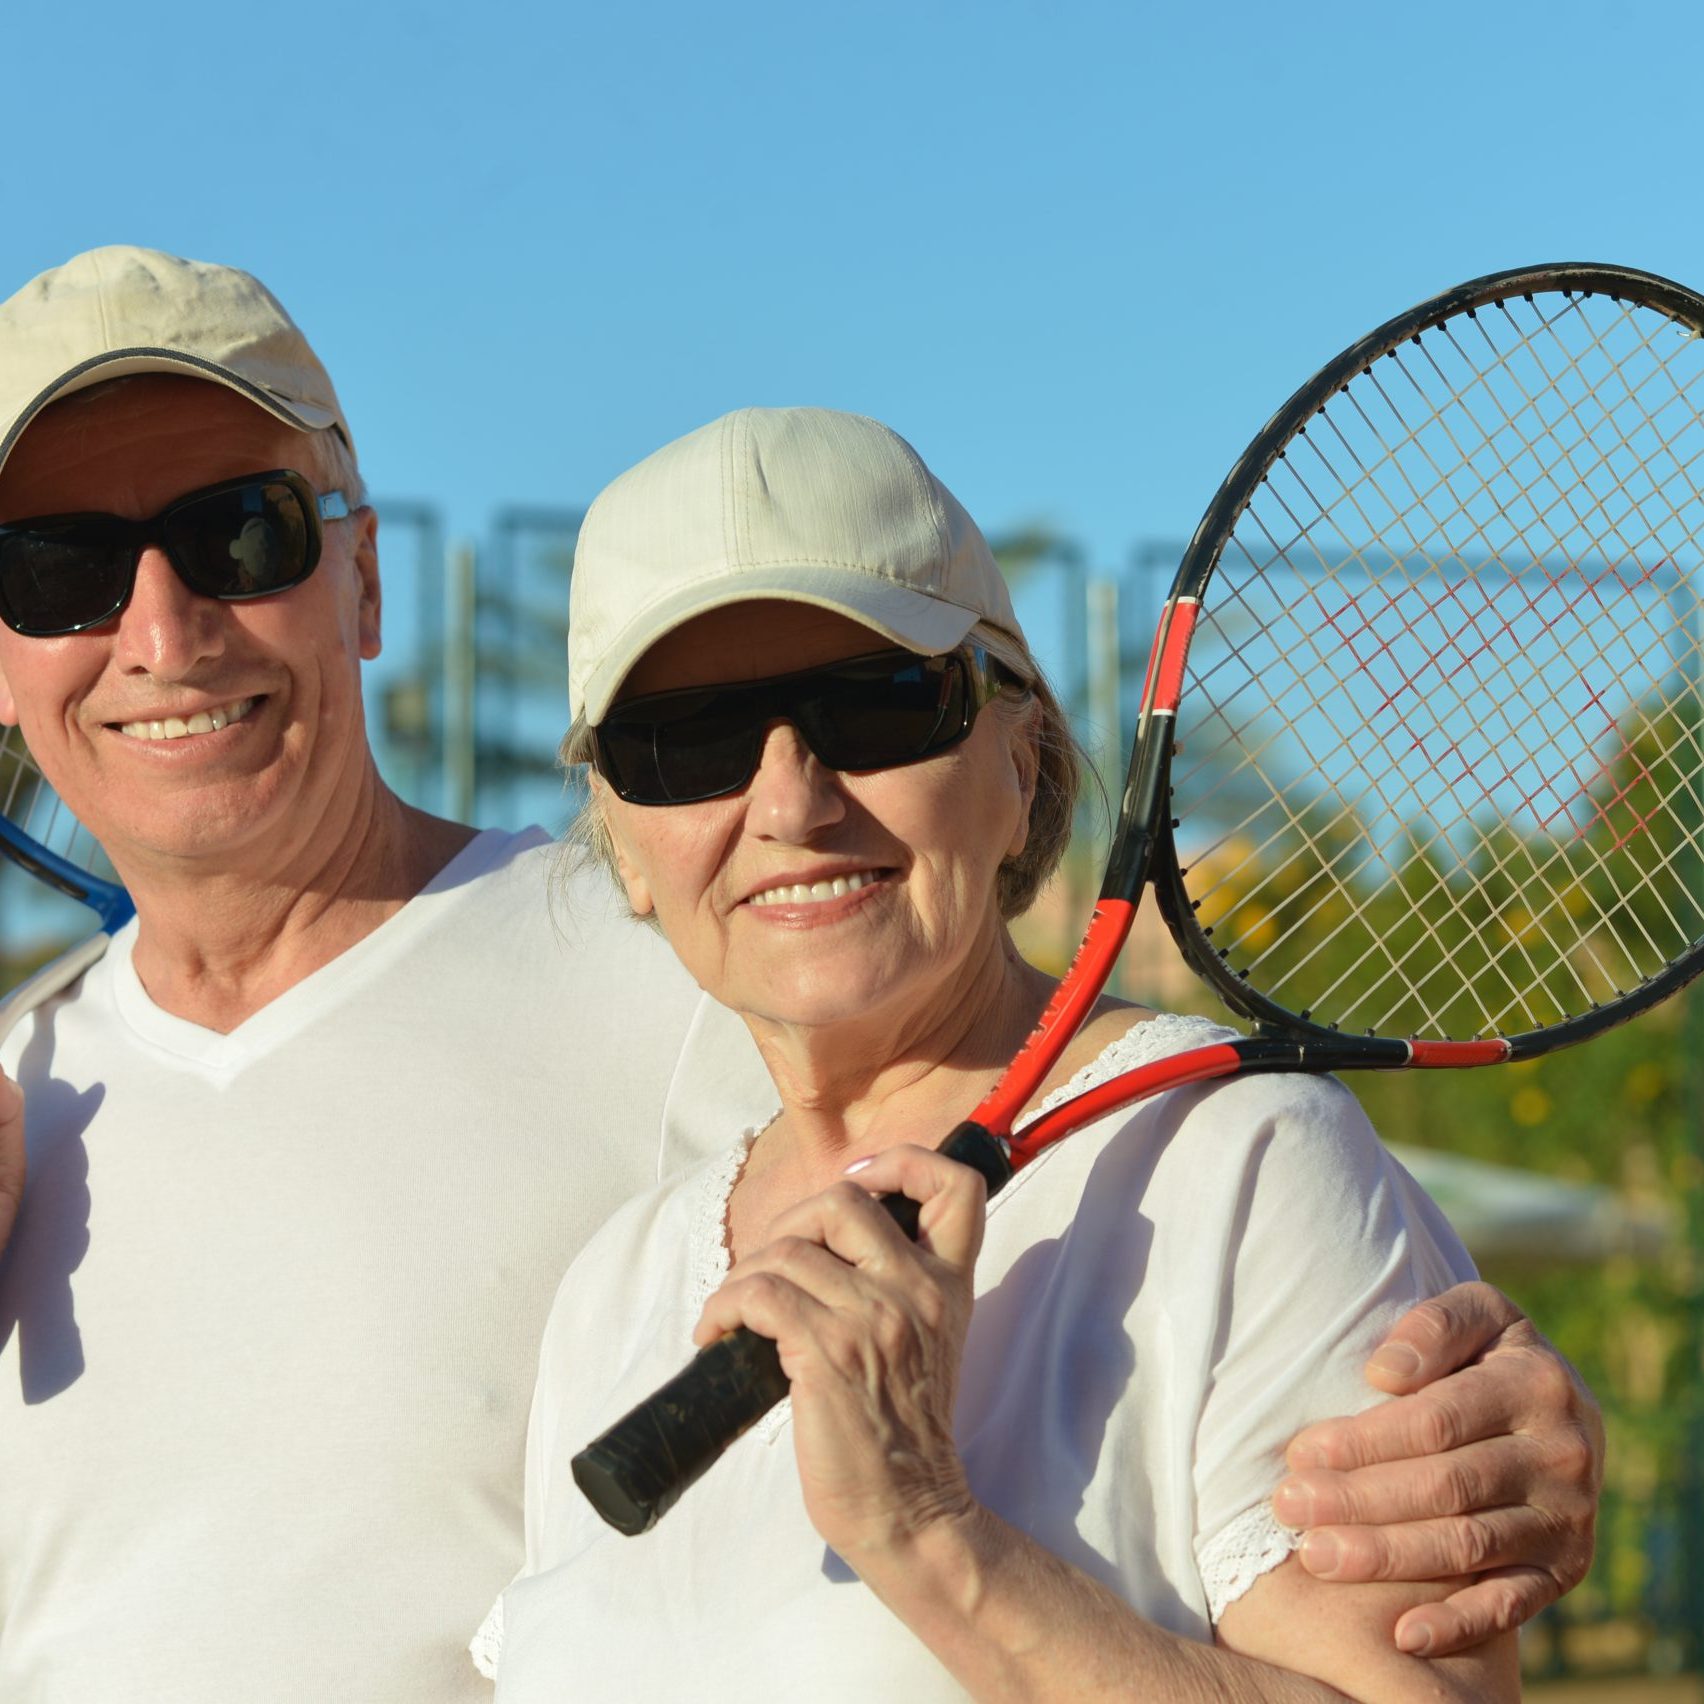 A smiling, happy couple wearing sunglasses rests between sets with tennis rackets in hand.